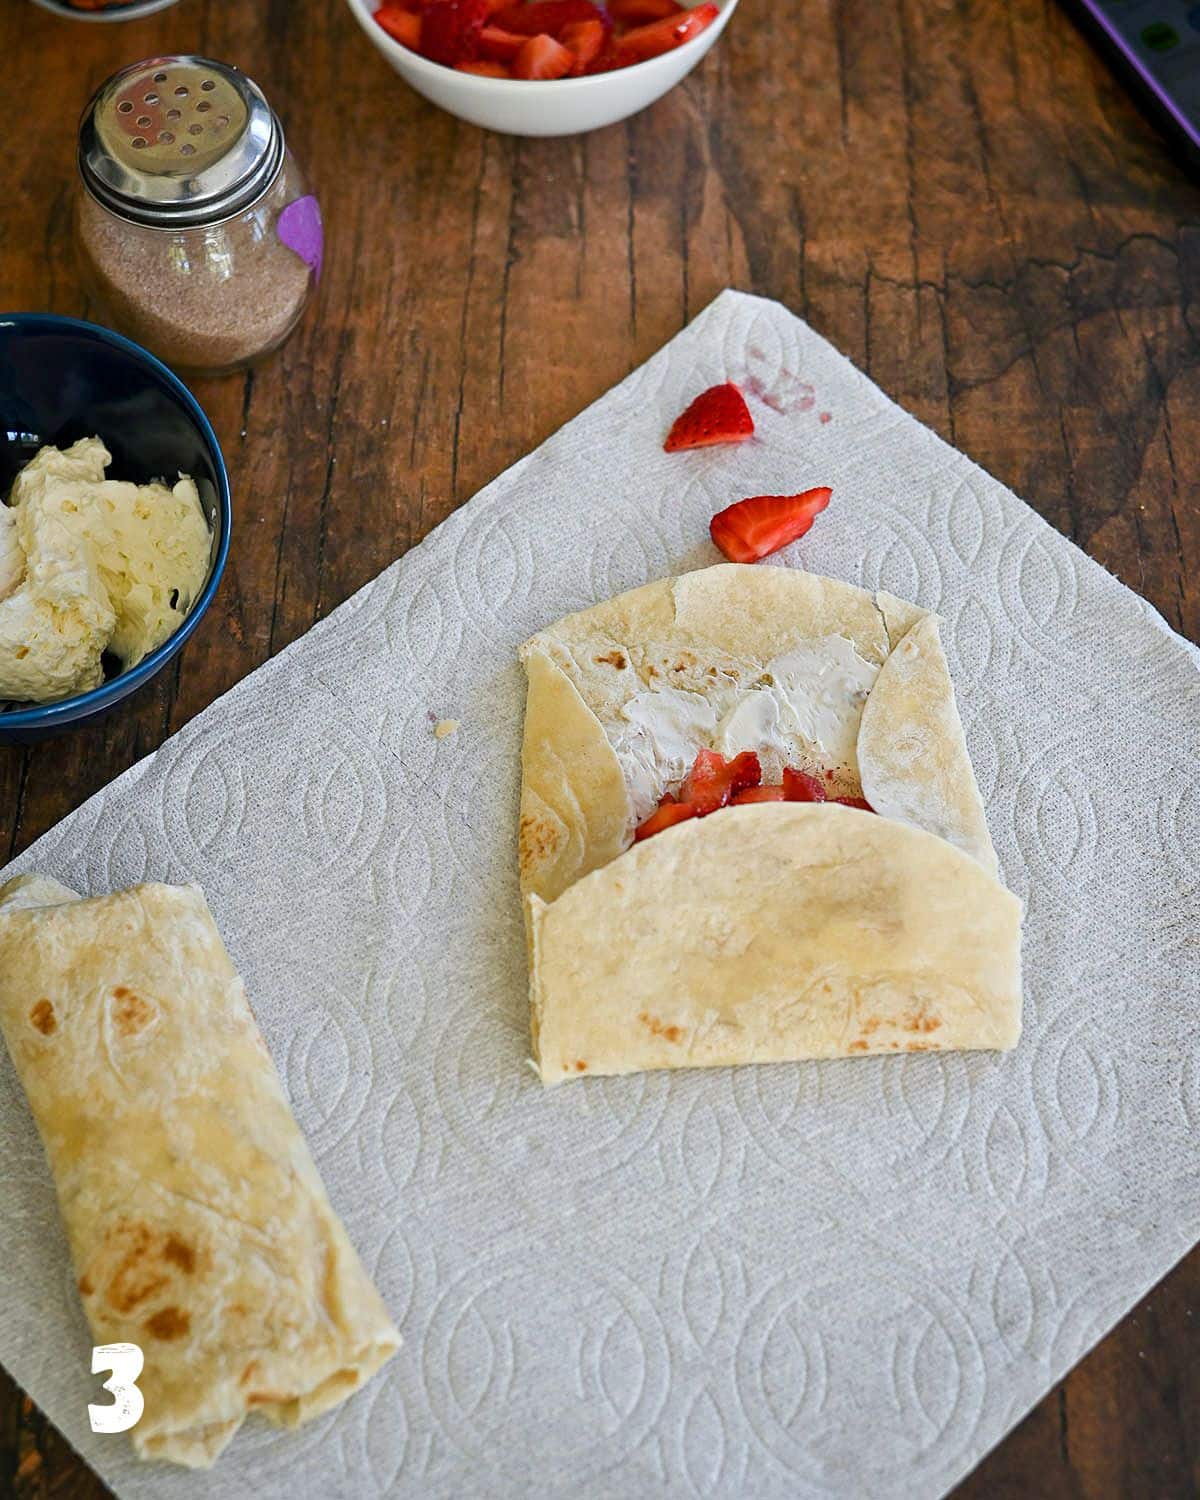 Folding a tortilla shell filled with cream cheese and strawberries.